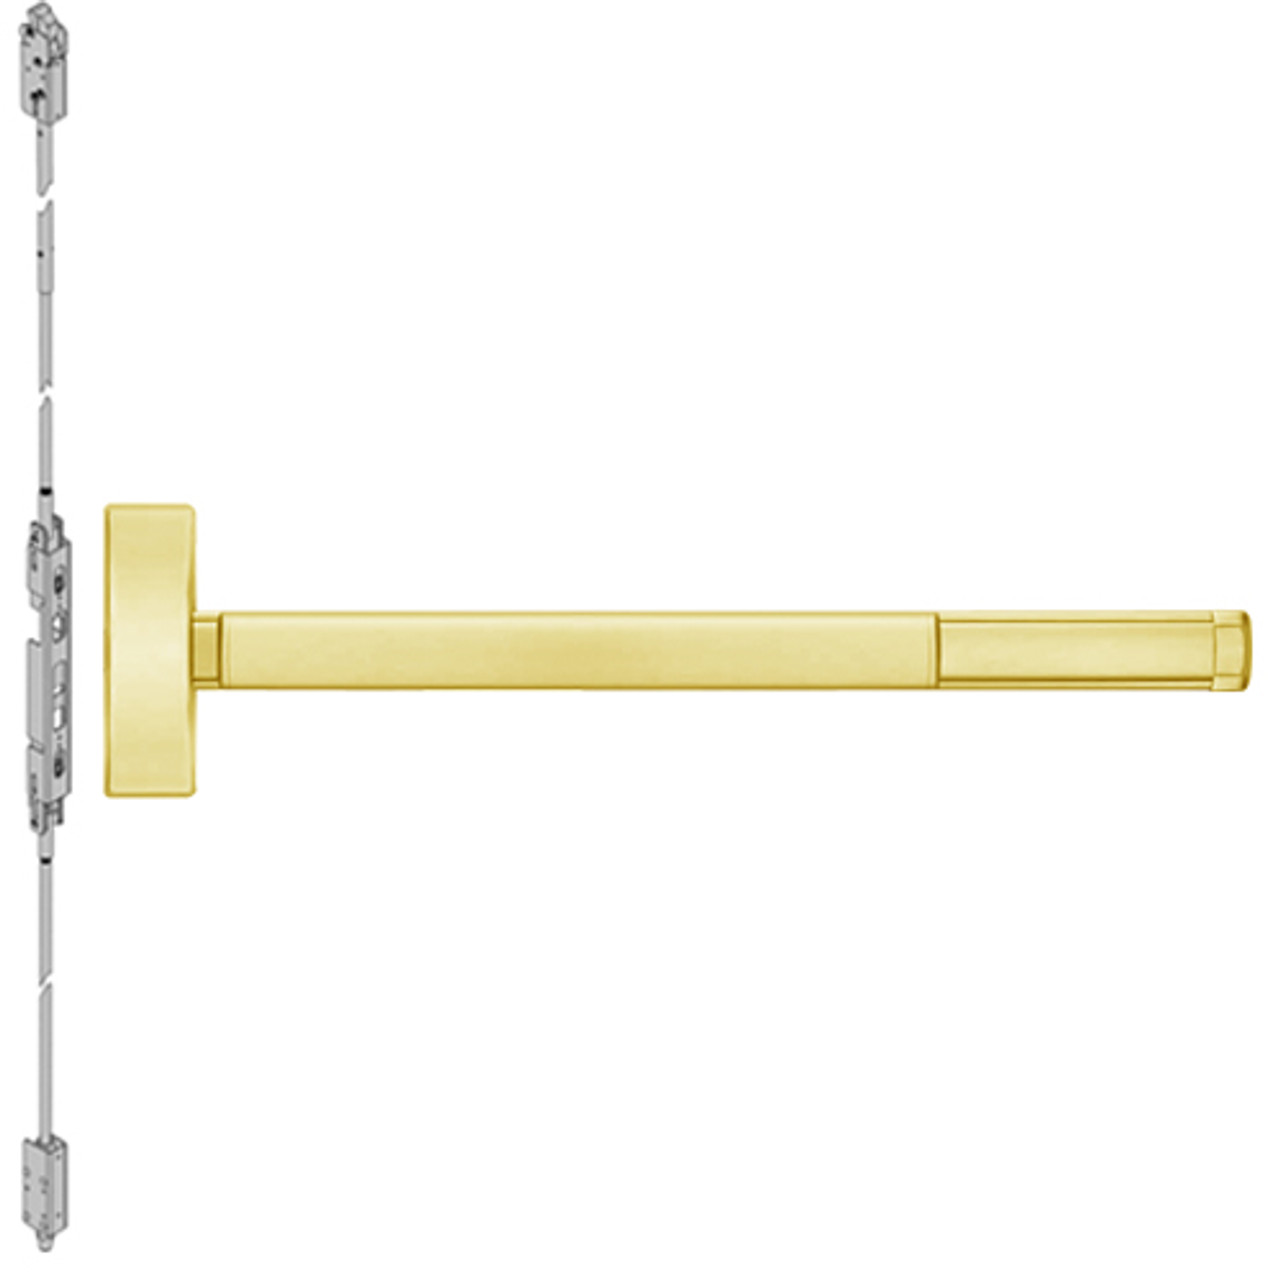 MLR2802-605-36 PHI 2800 Series Concealed Vertical Rod Exit Device with Motorized Latch Retraction Prepped for Dummy Trim in Bright Brass Finish